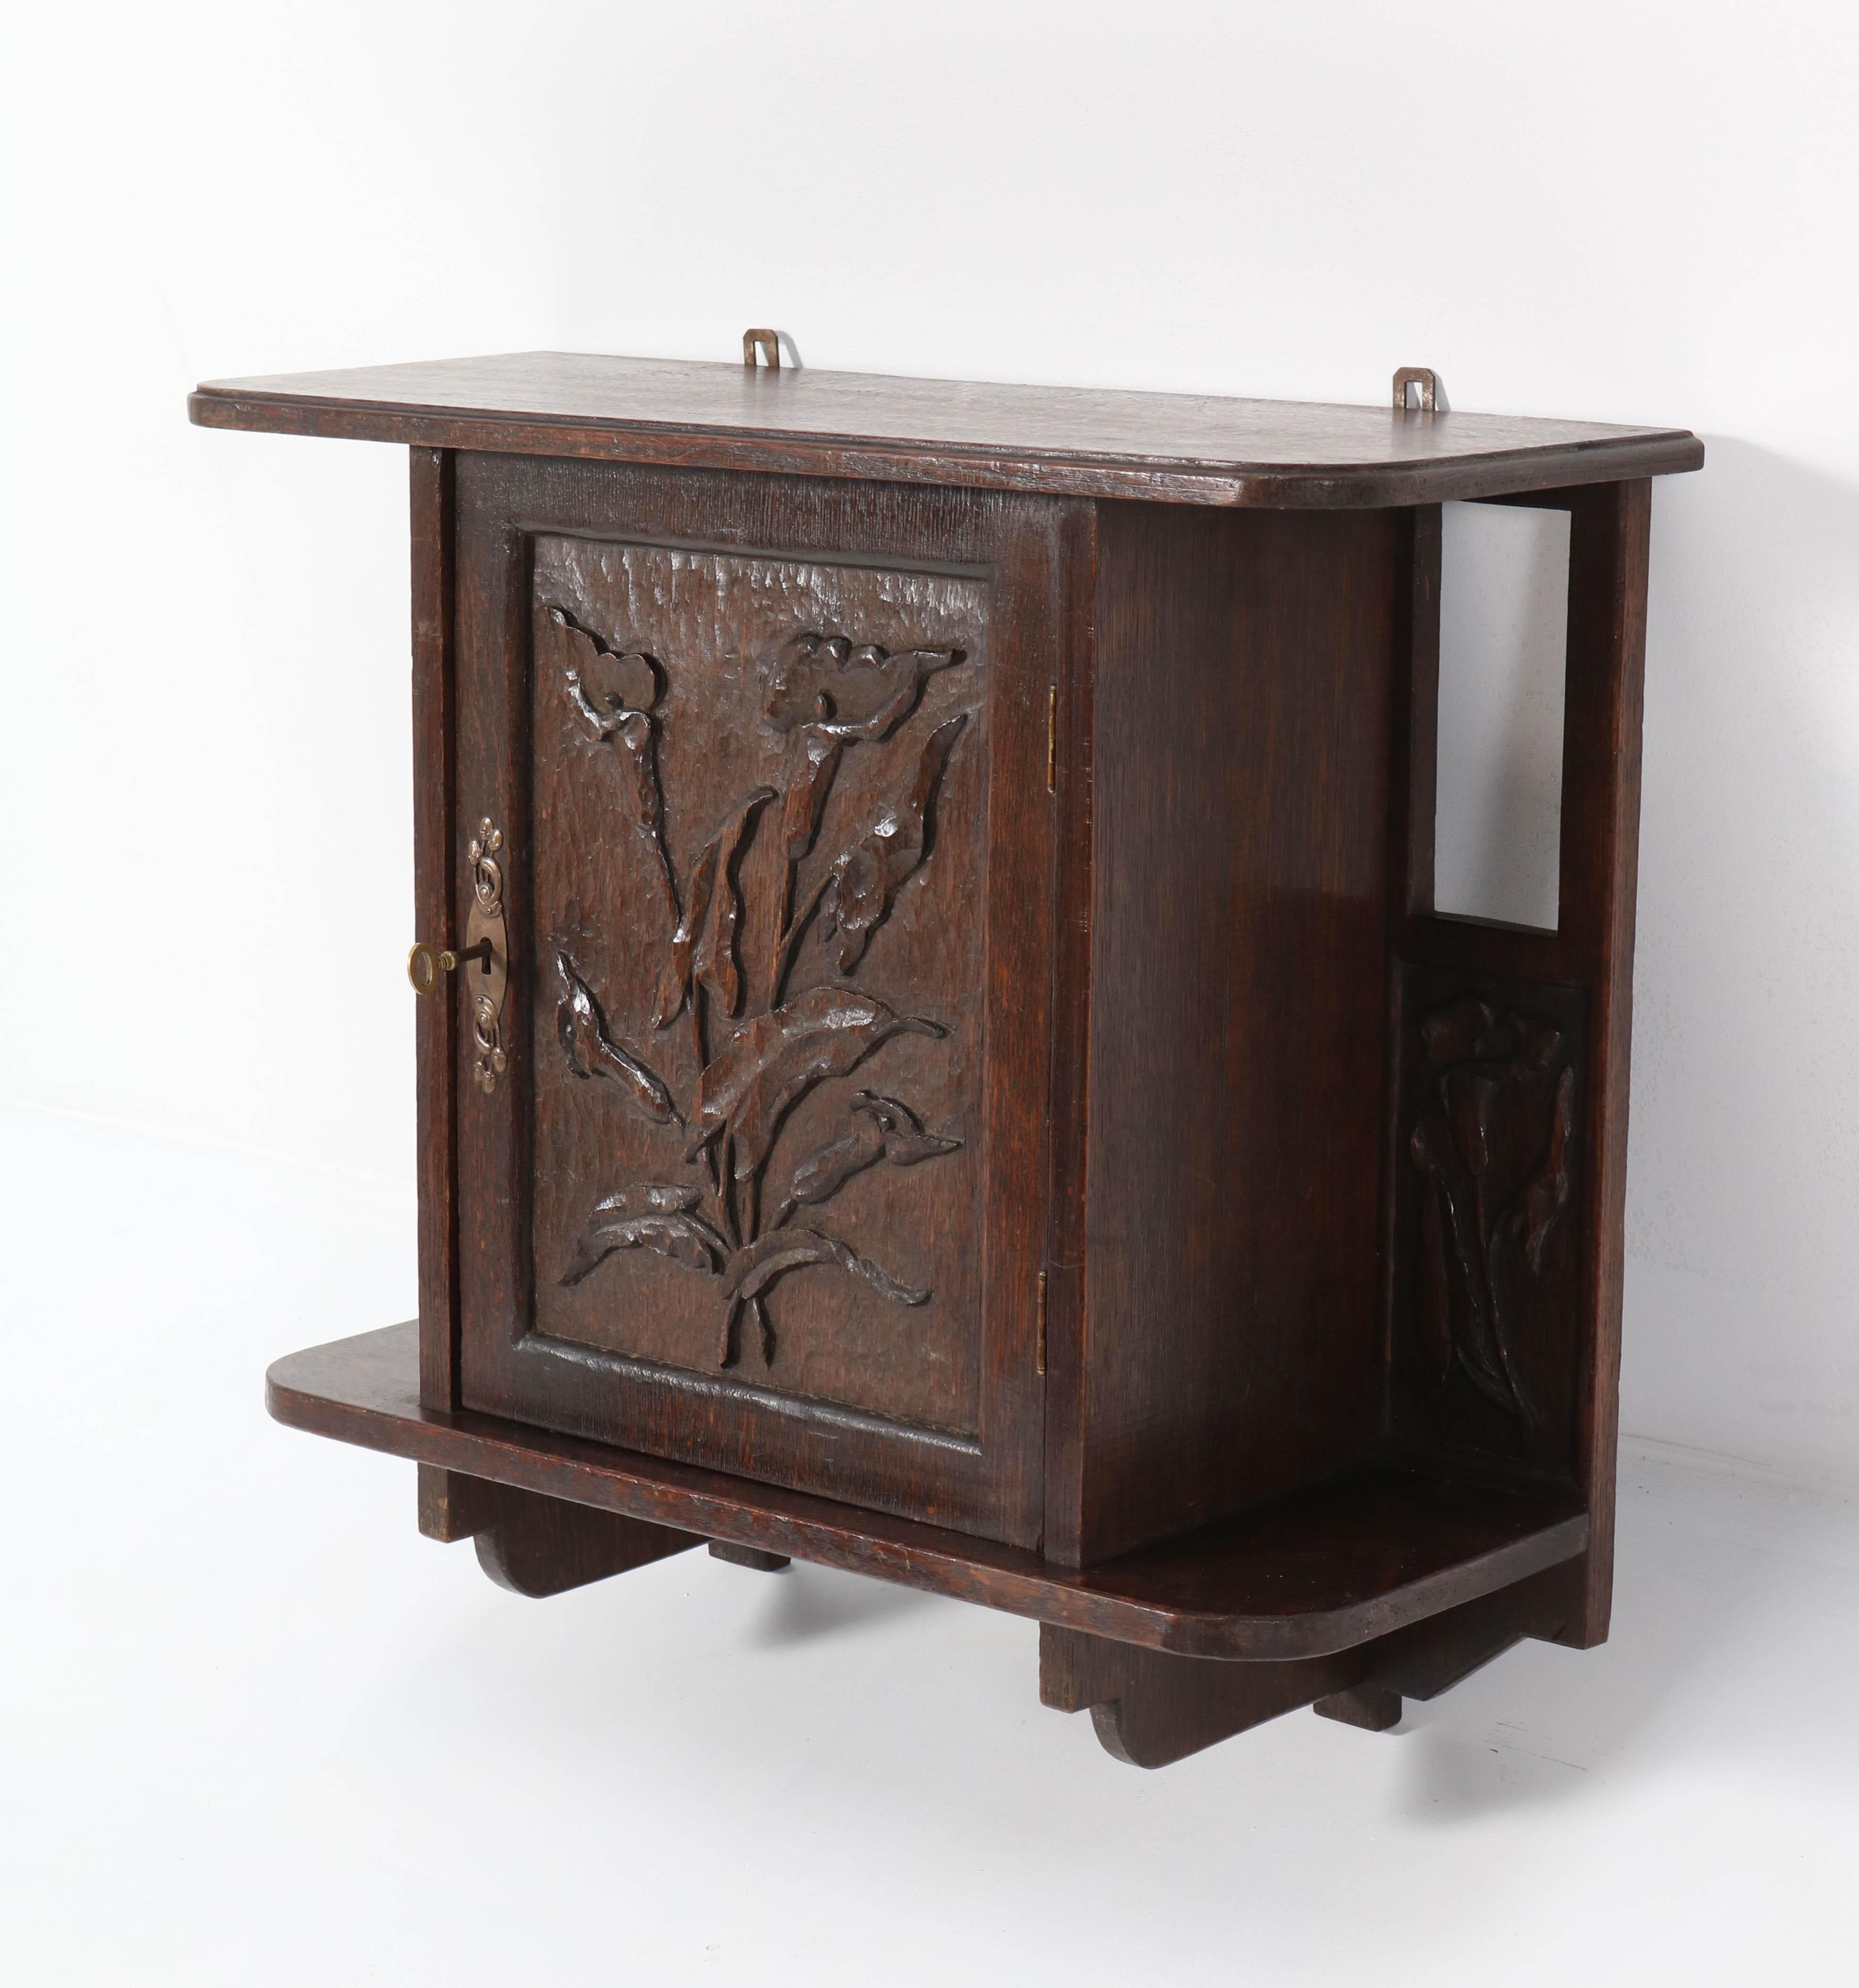 Magnificent and rare Arts & Crafts Art Nouveau wall cabinet.
Striking Dutch design from the 1900s.
Solid oak with wonderful hand carved calla lilies.
In very good condition with minor wear consistent with age and use,
preserving a beautiful